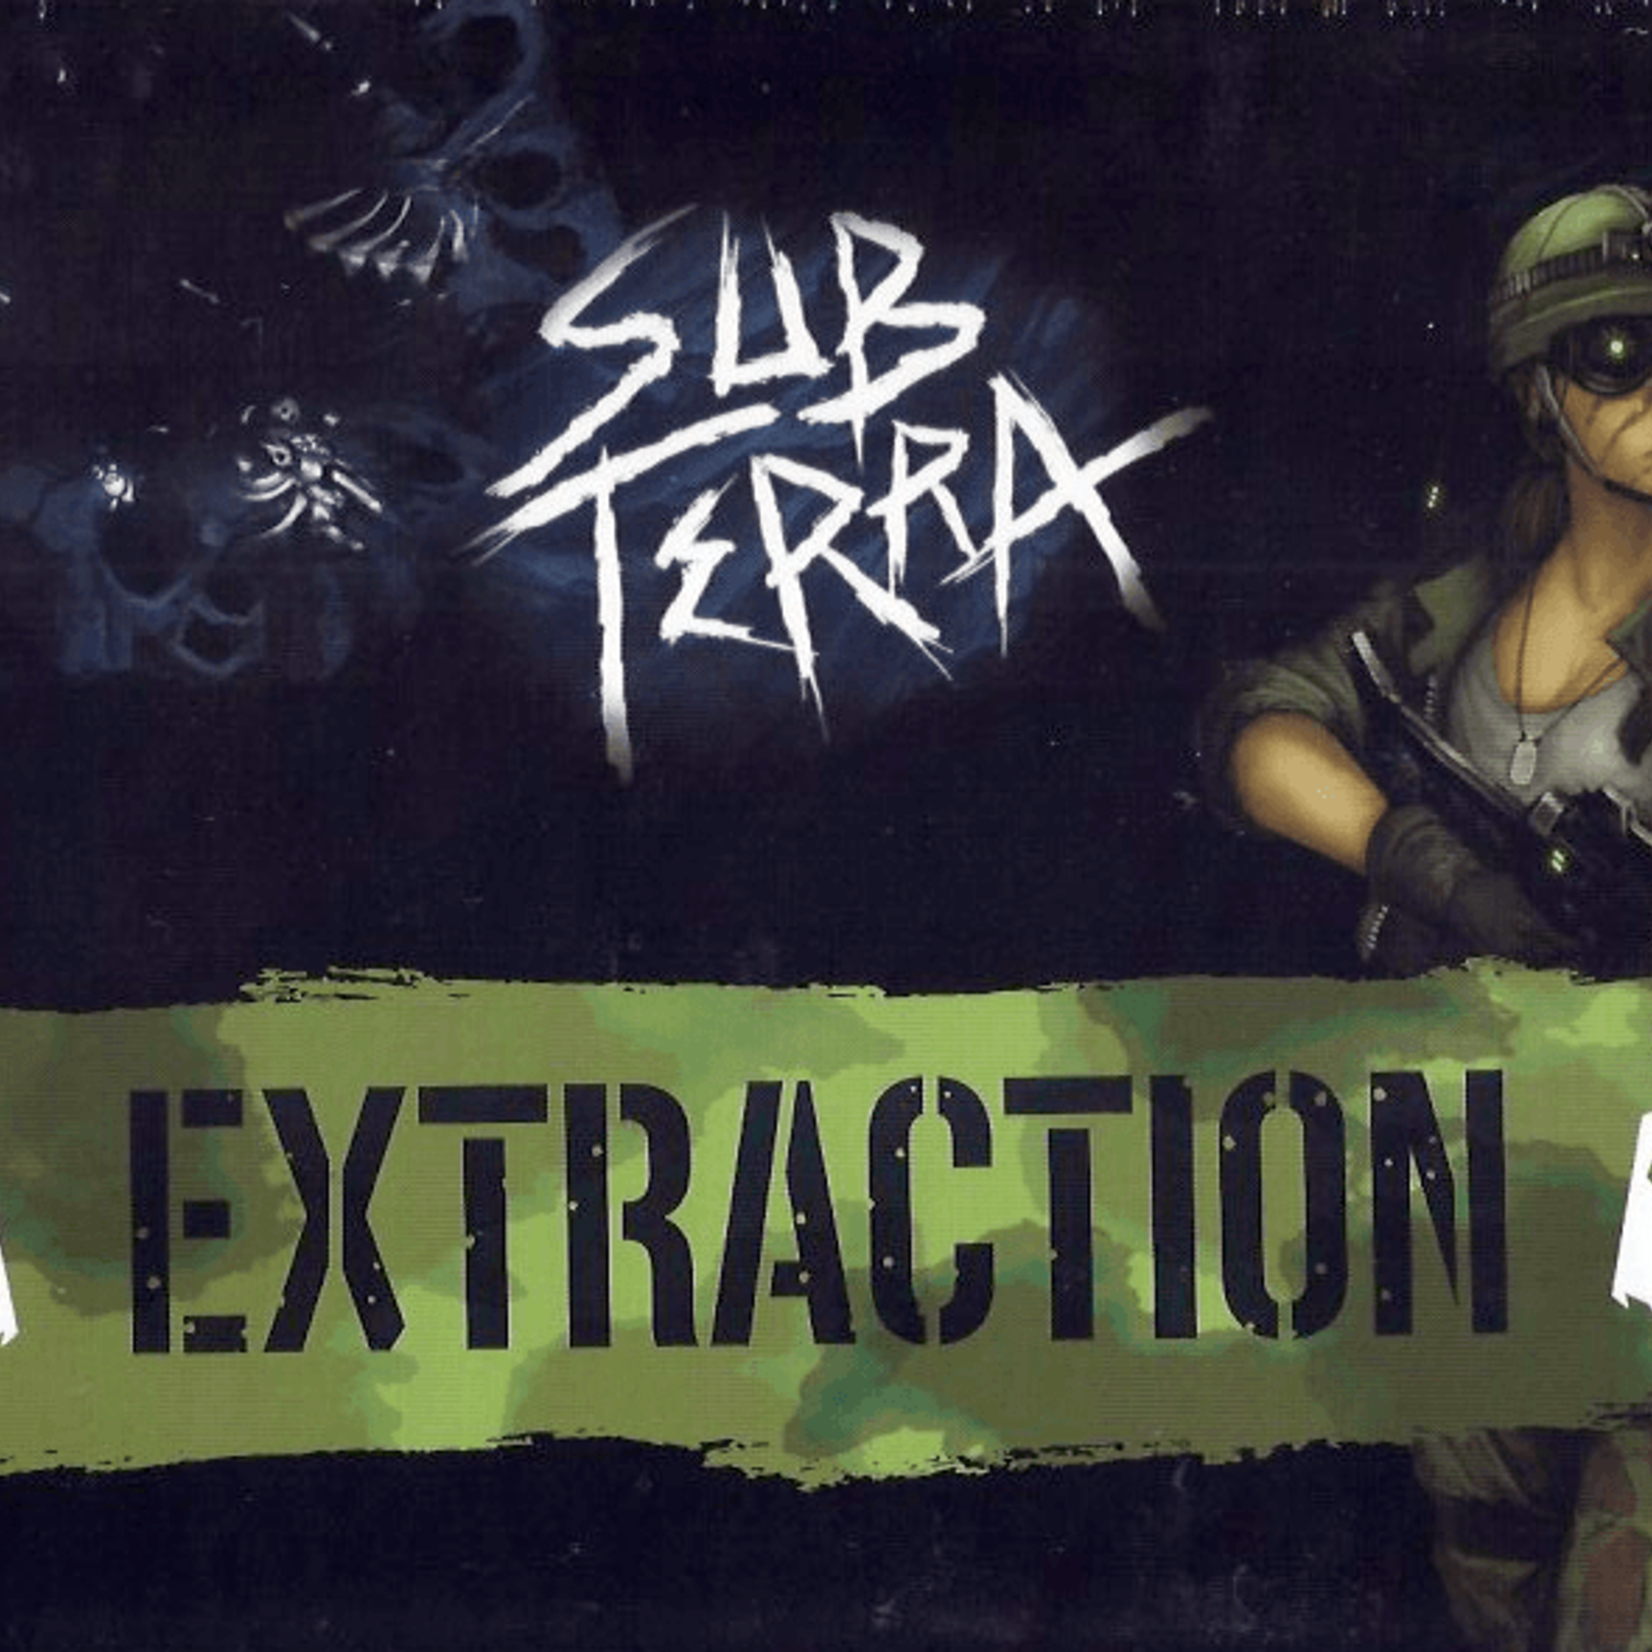 Nuts! Sub Terra : Extraction